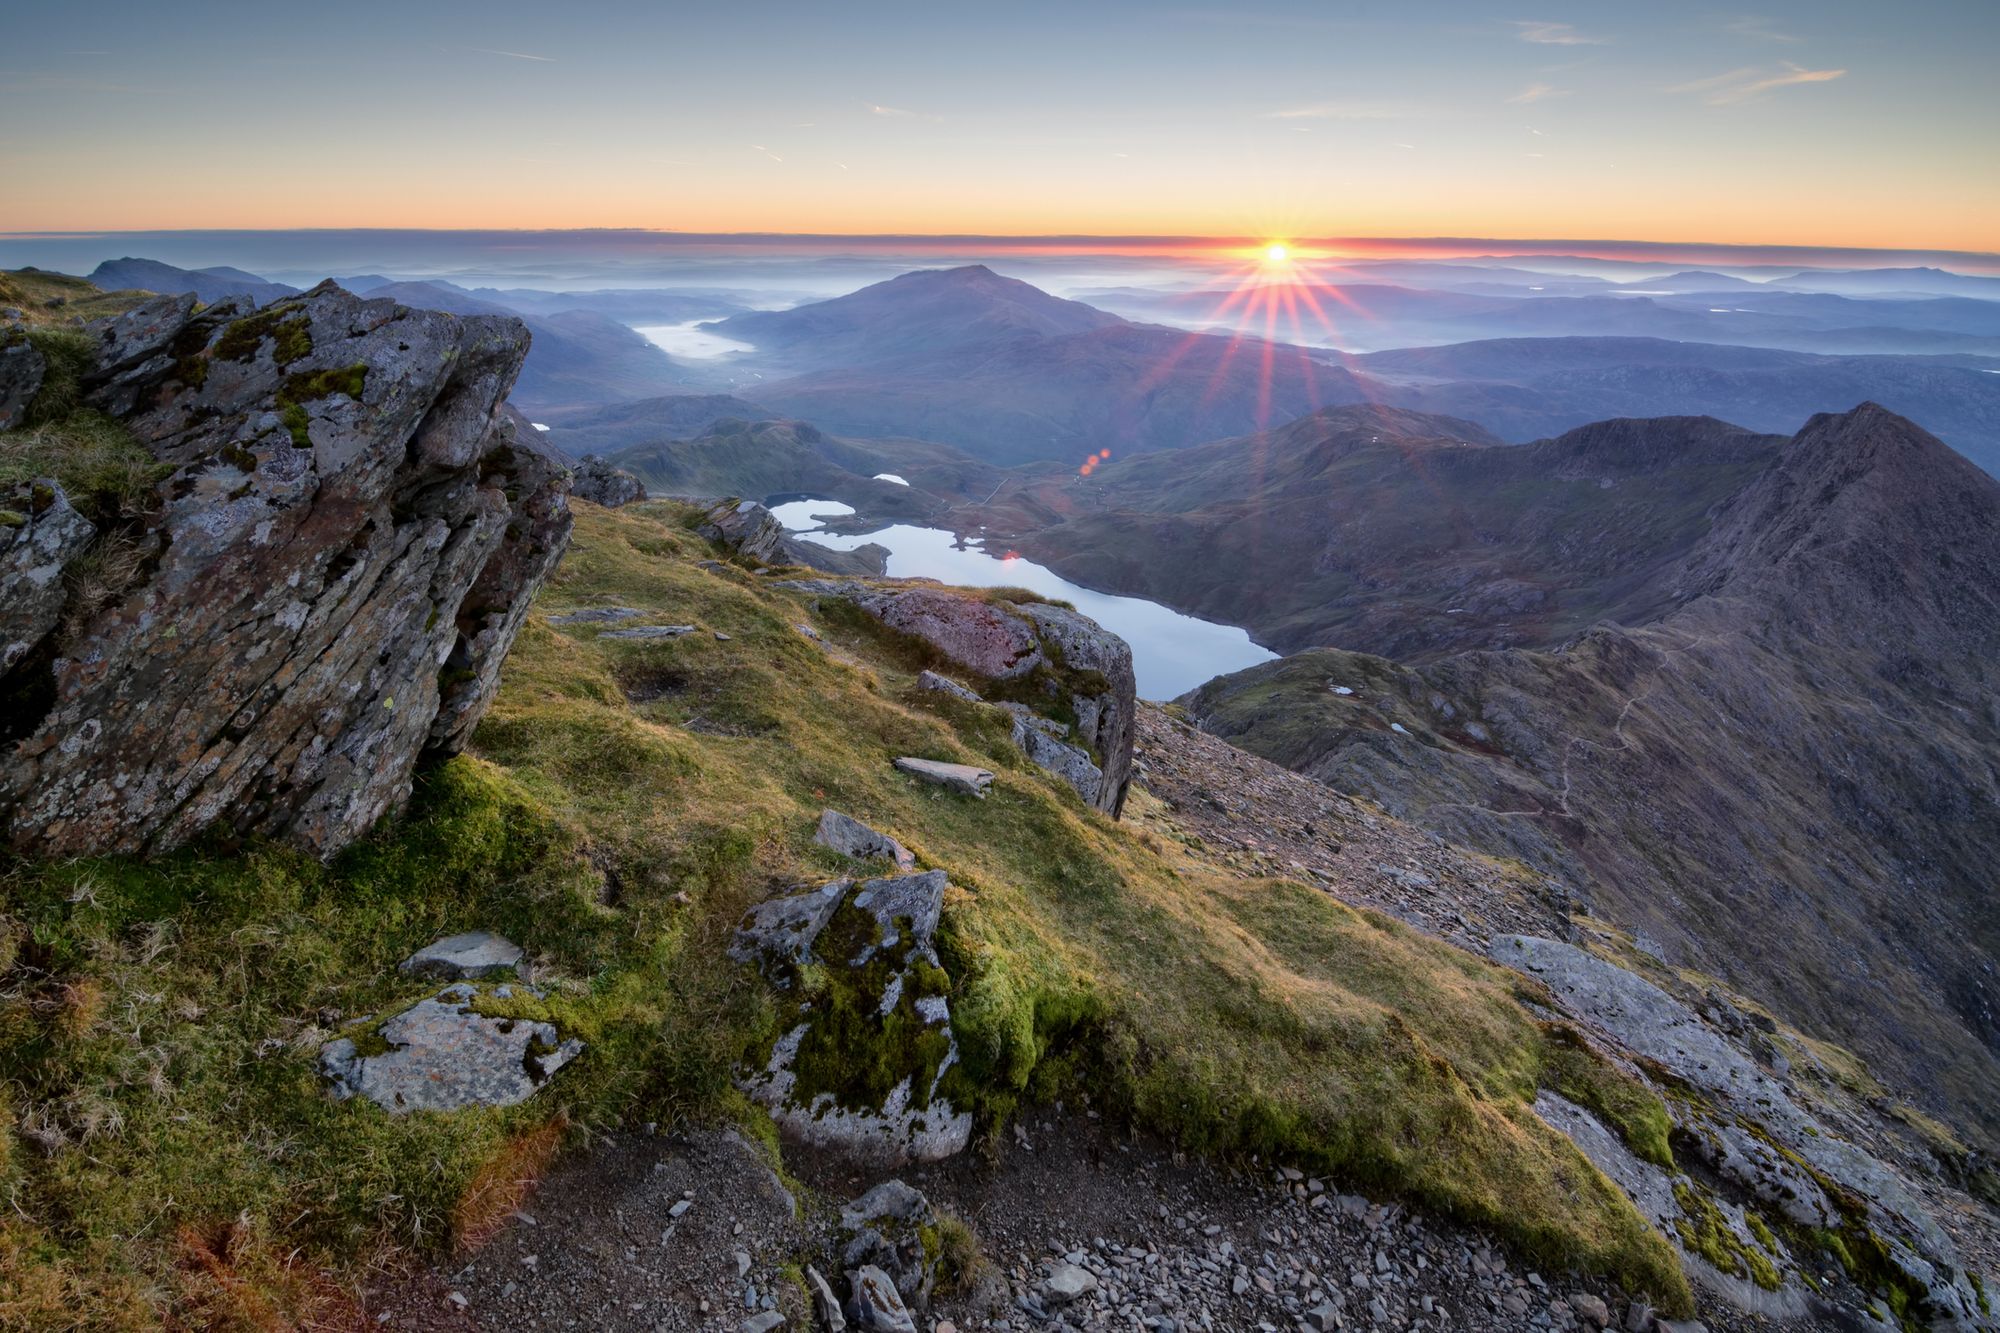 The view from the summit of Snowdon at sunrise, easily one of the best hikes in Snowdonia.